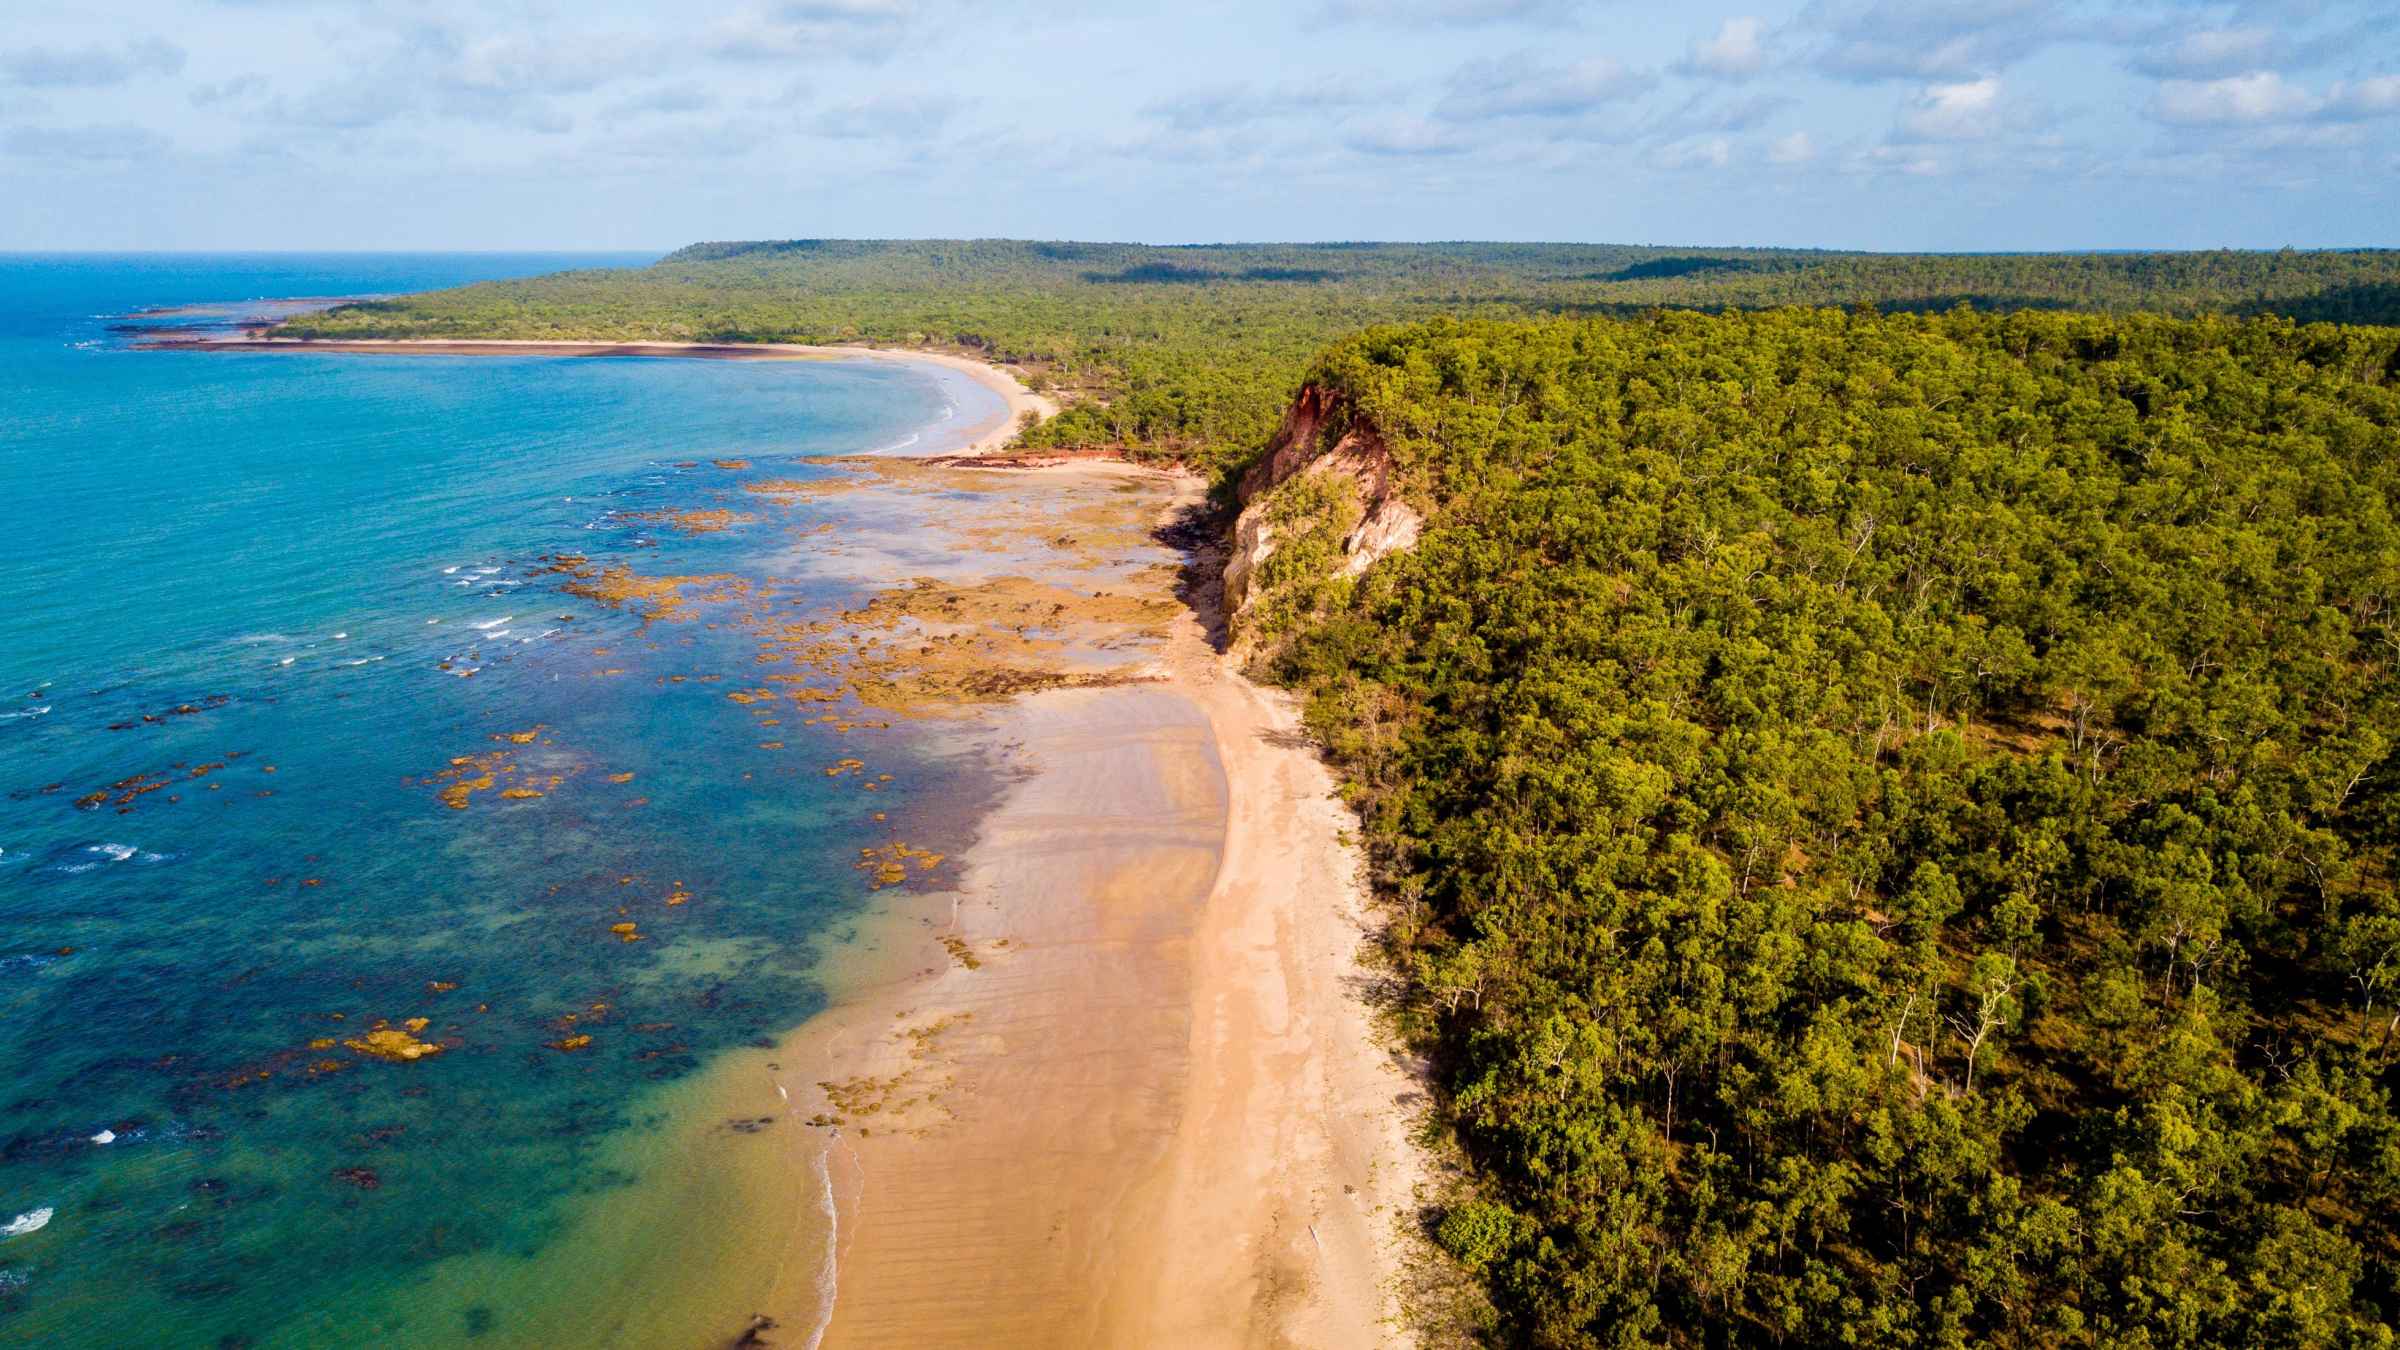 Arnhem Land Region 2021 Top 10 Tours And Activities With Photos Things To Do In Arnhem Land